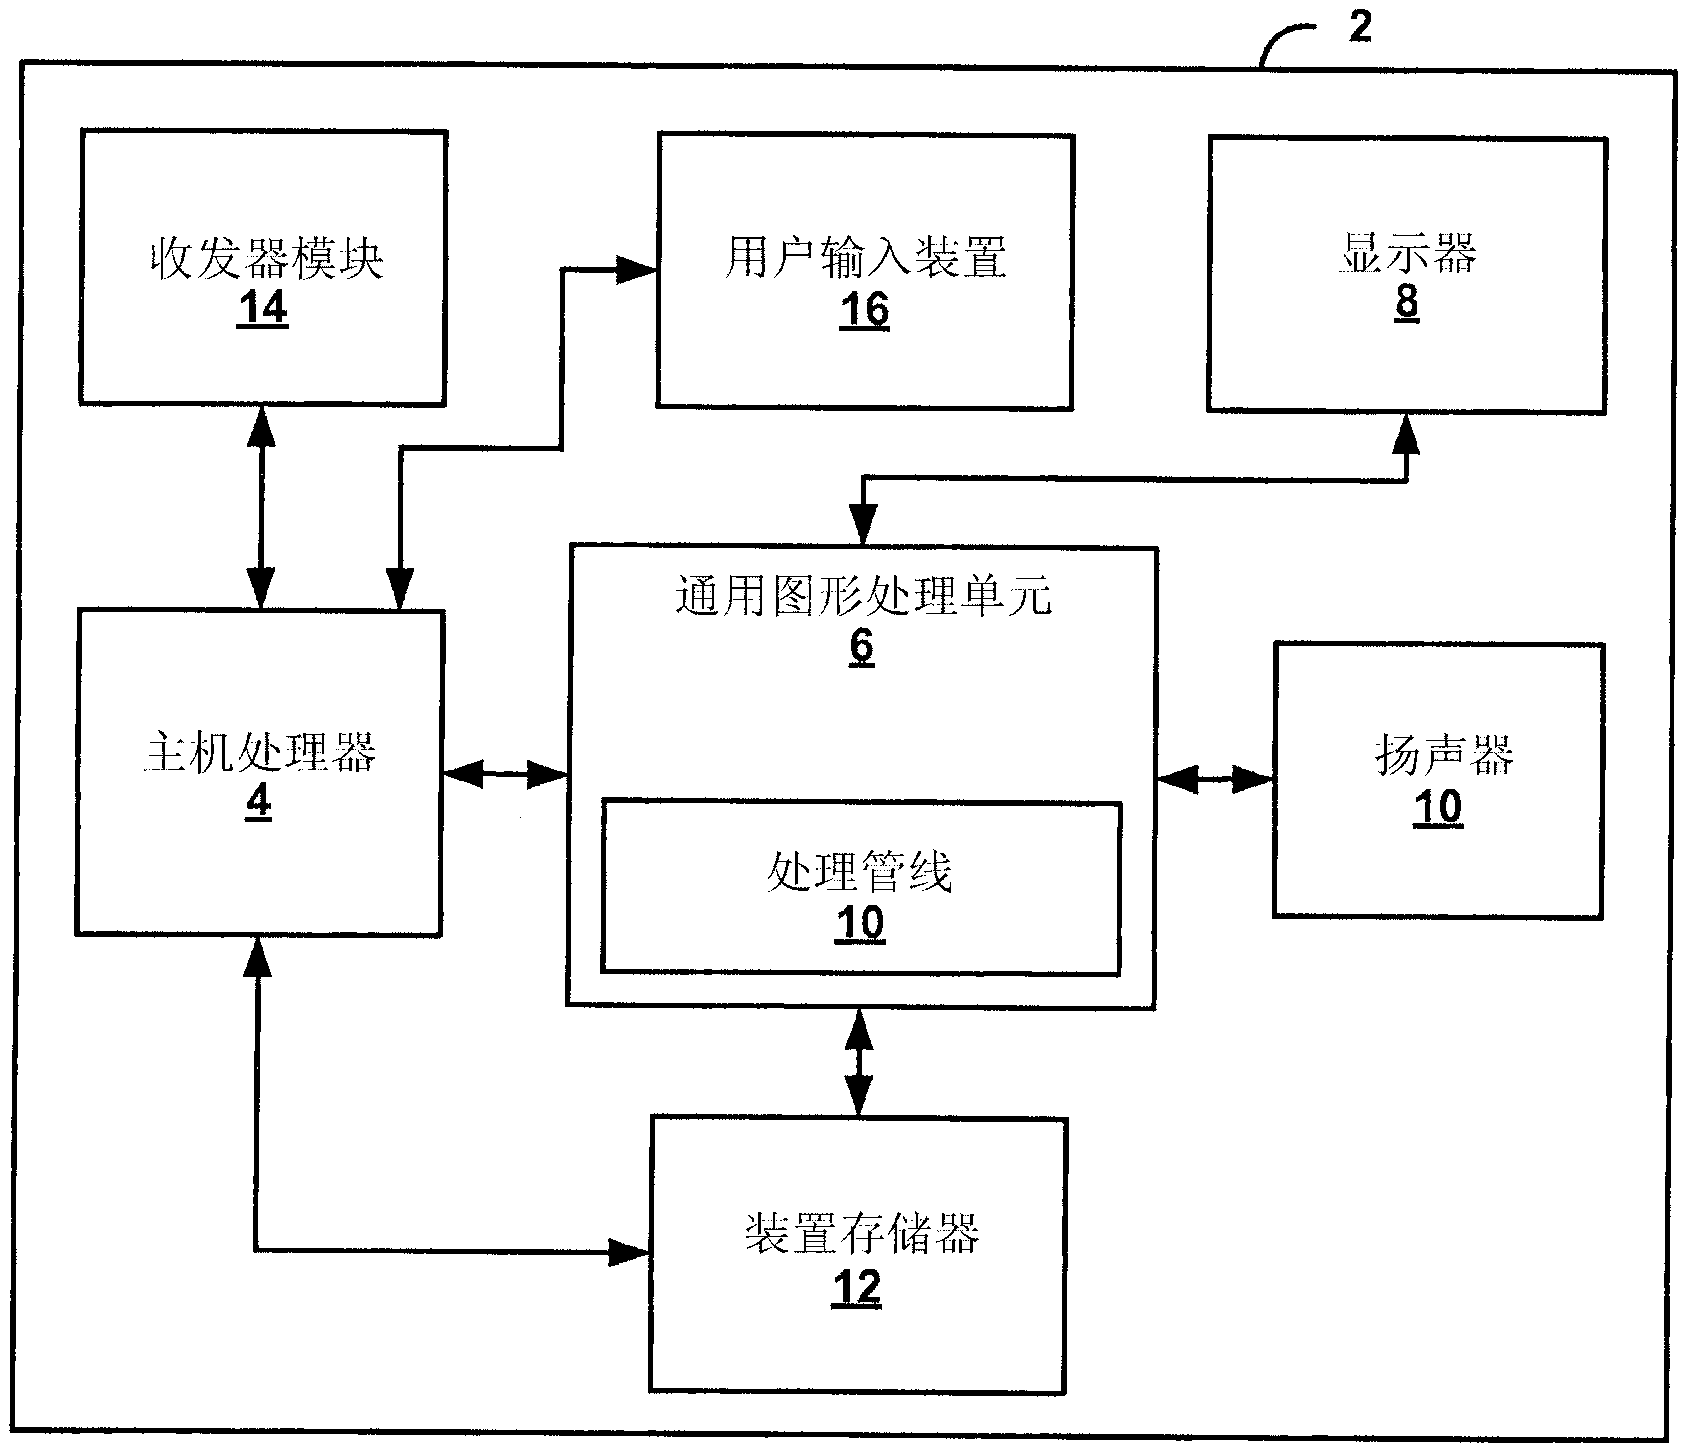 Computational resource pipelining in general purpose graphics processing unit